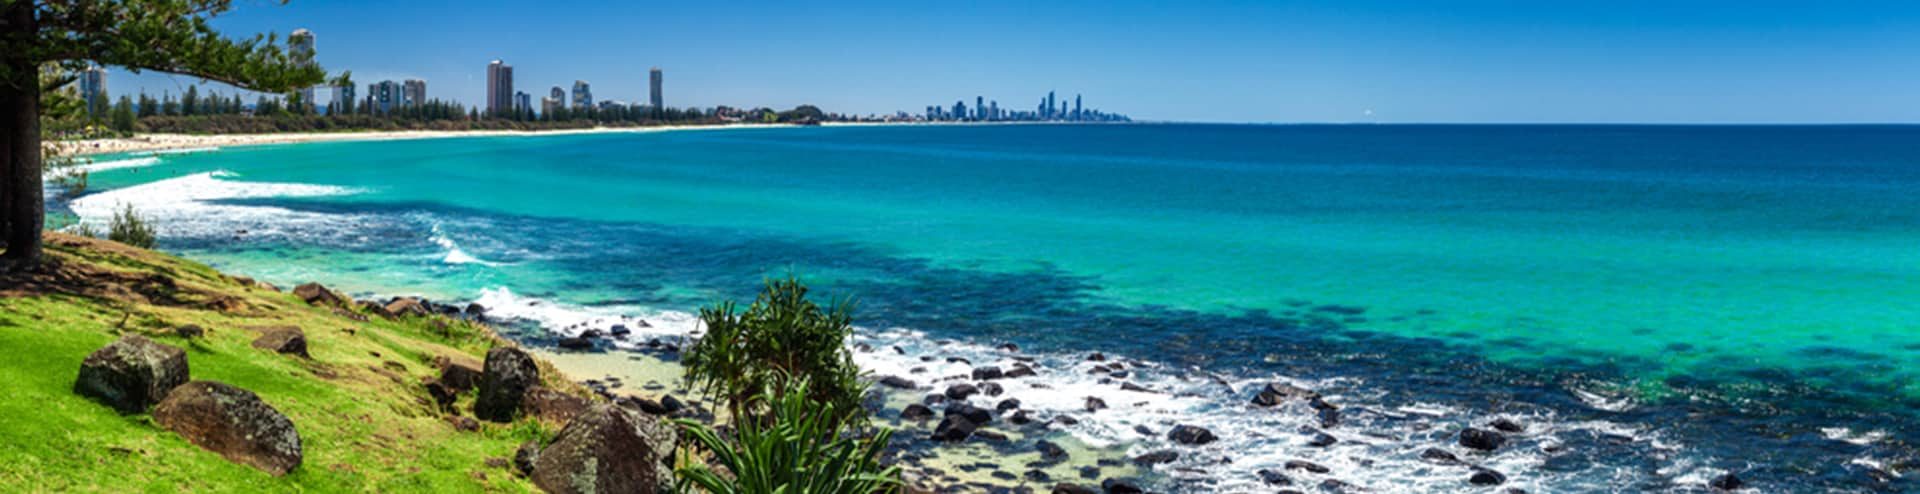 Gold Coast skyline and surfing beach visible from Burleigh Heads, Queensland — Ryan Roofing Australia In Court Carrara, QLD